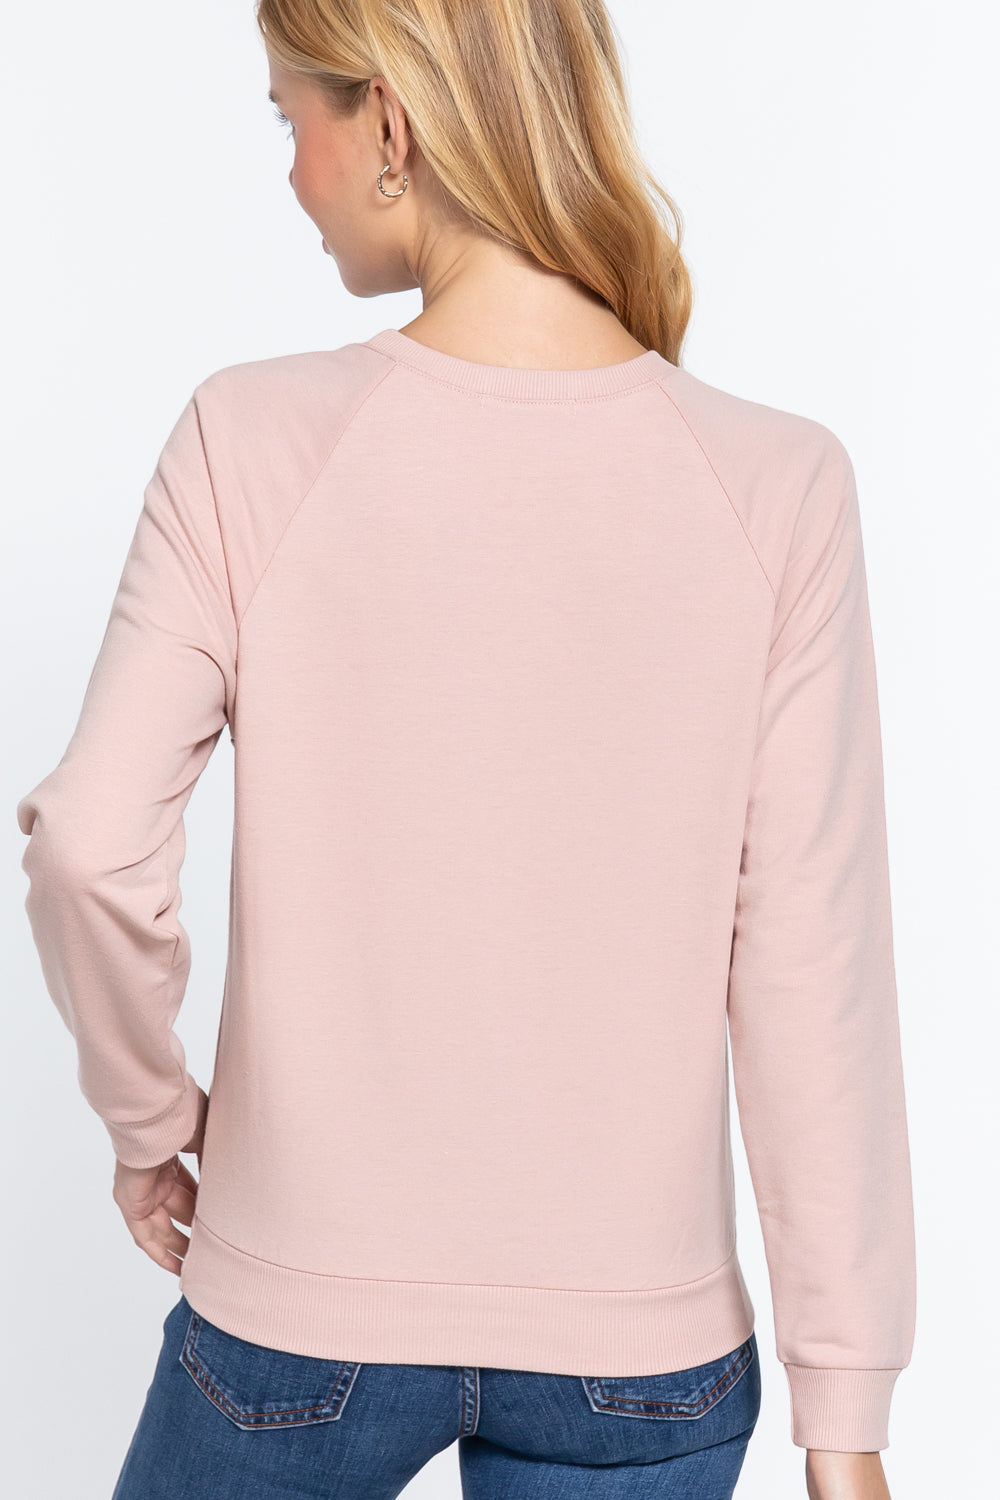 Sequins French Terry Pullover Top- Multiple Colors